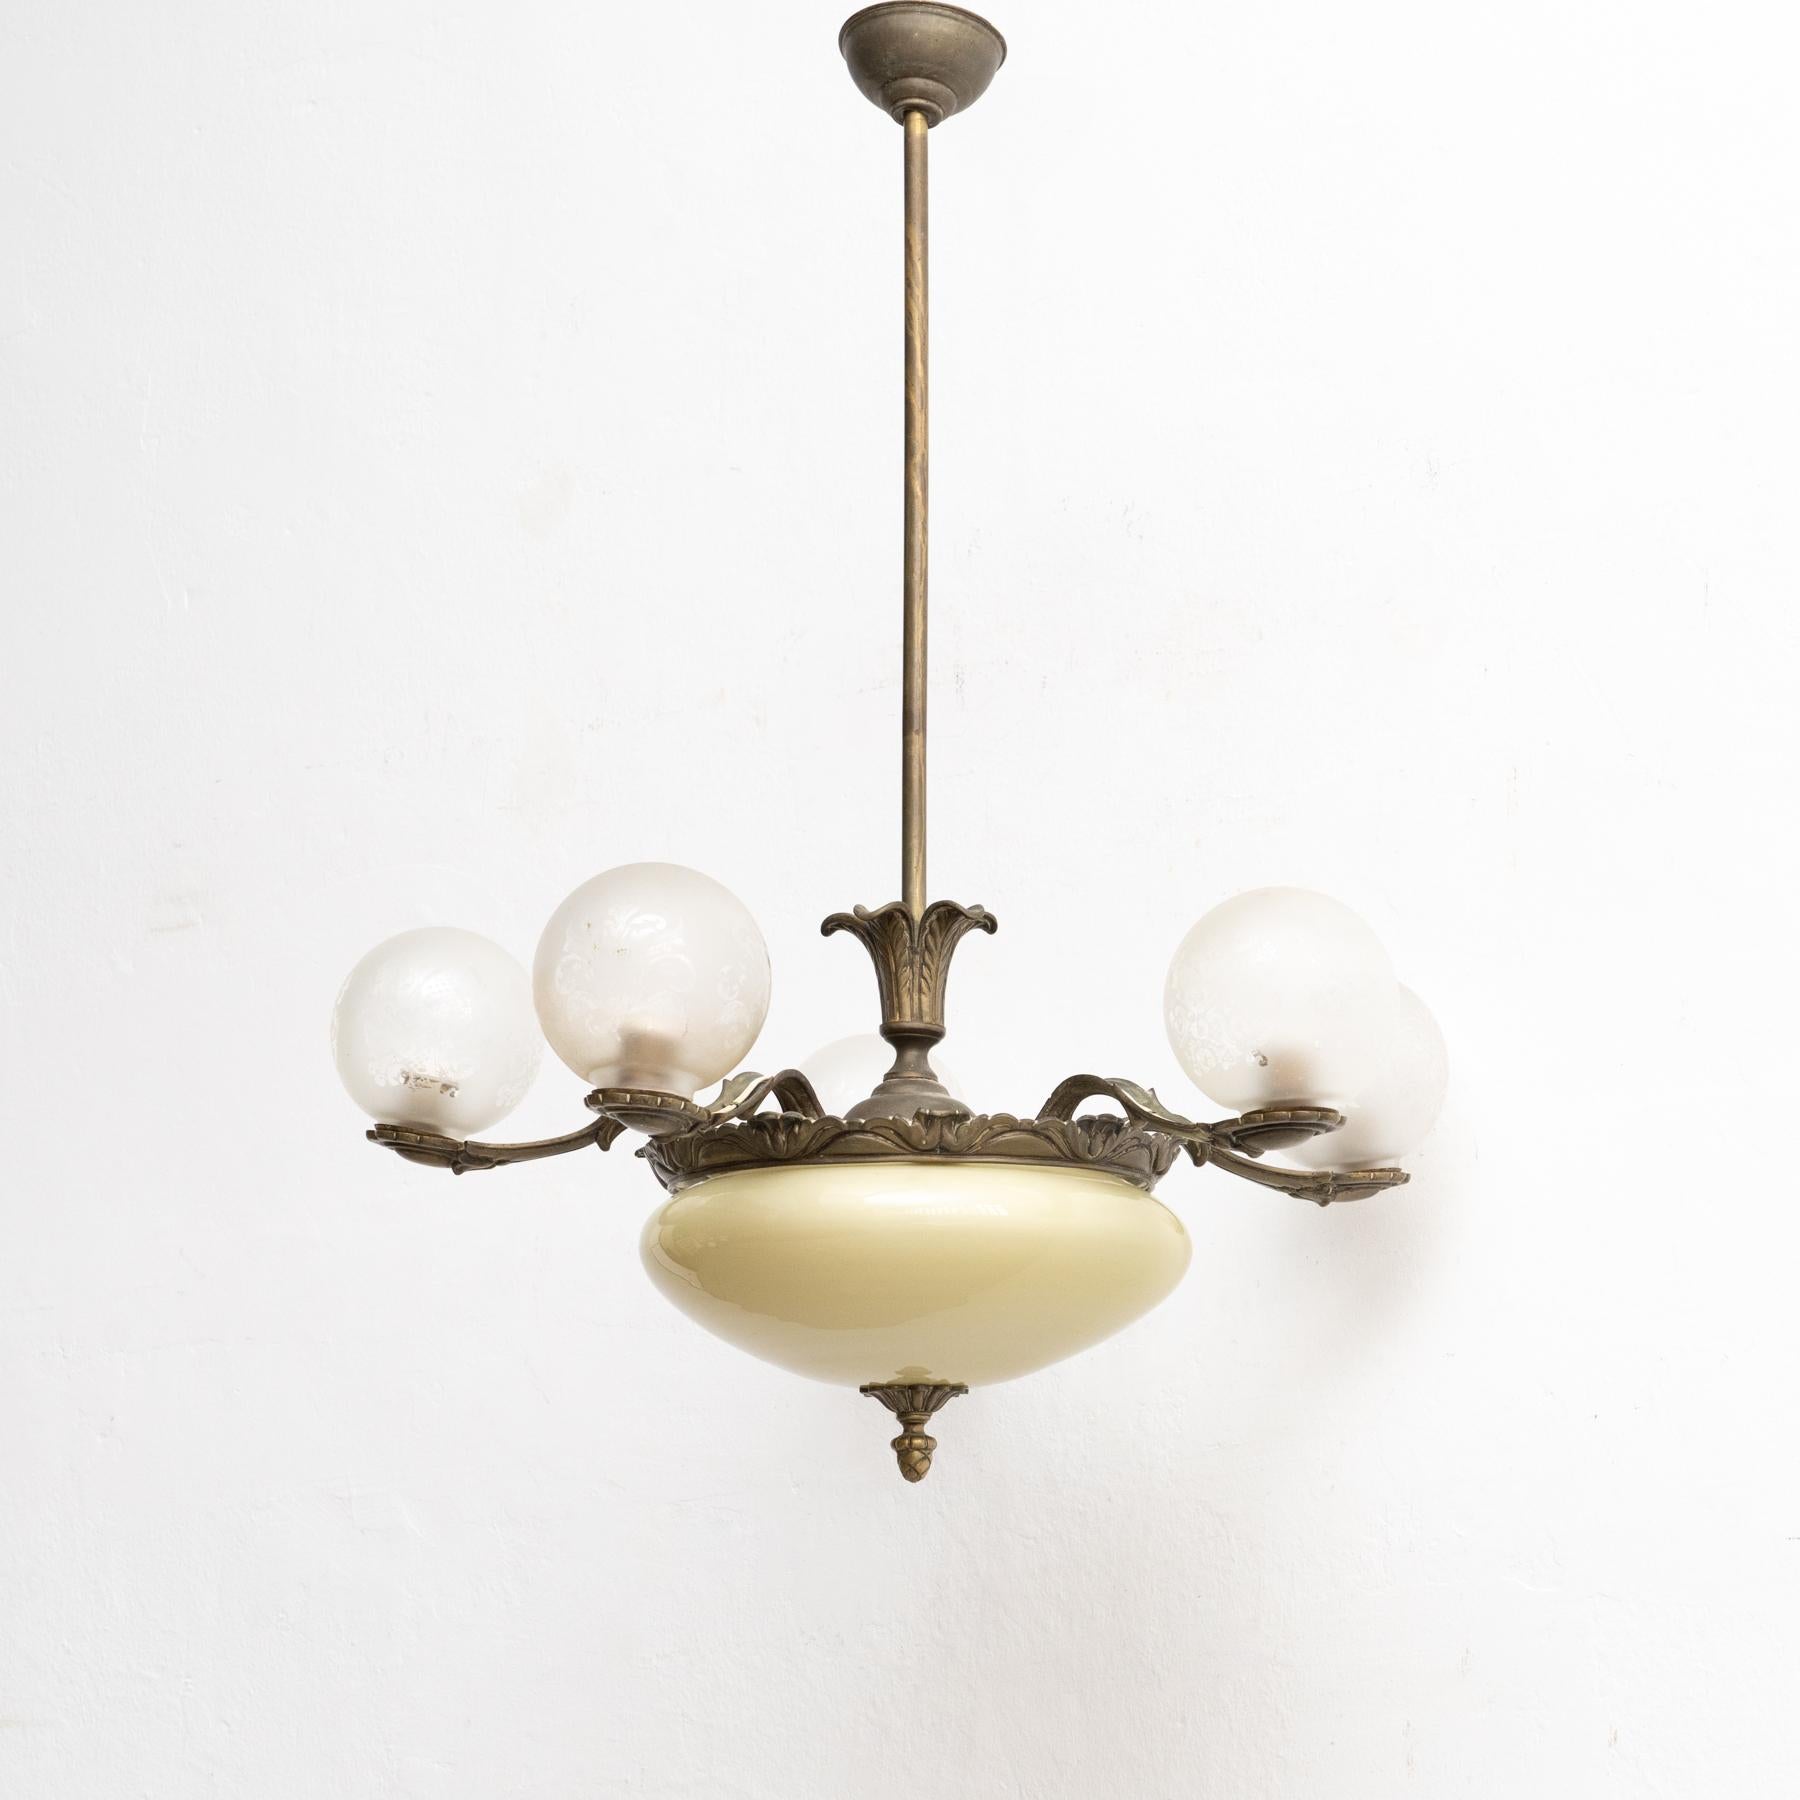 Art Deco Vintage French Metal and Glass Ceiling Lamp circa 1940 For Sale